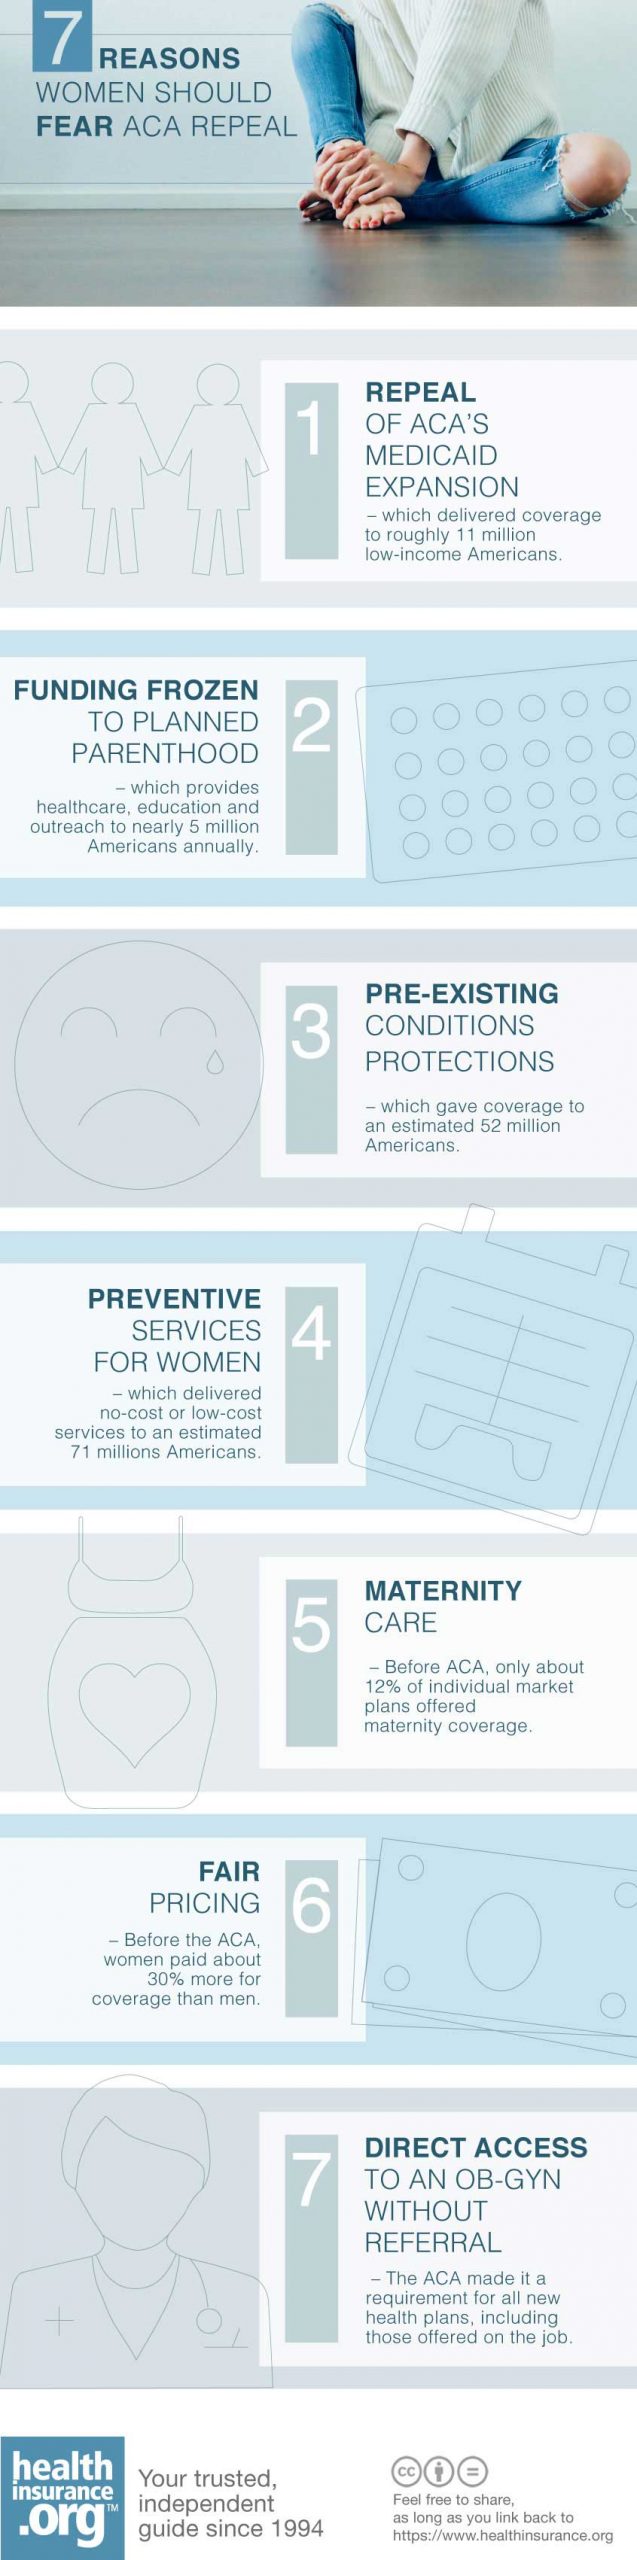 7 reasons why women should fear ACA repeal